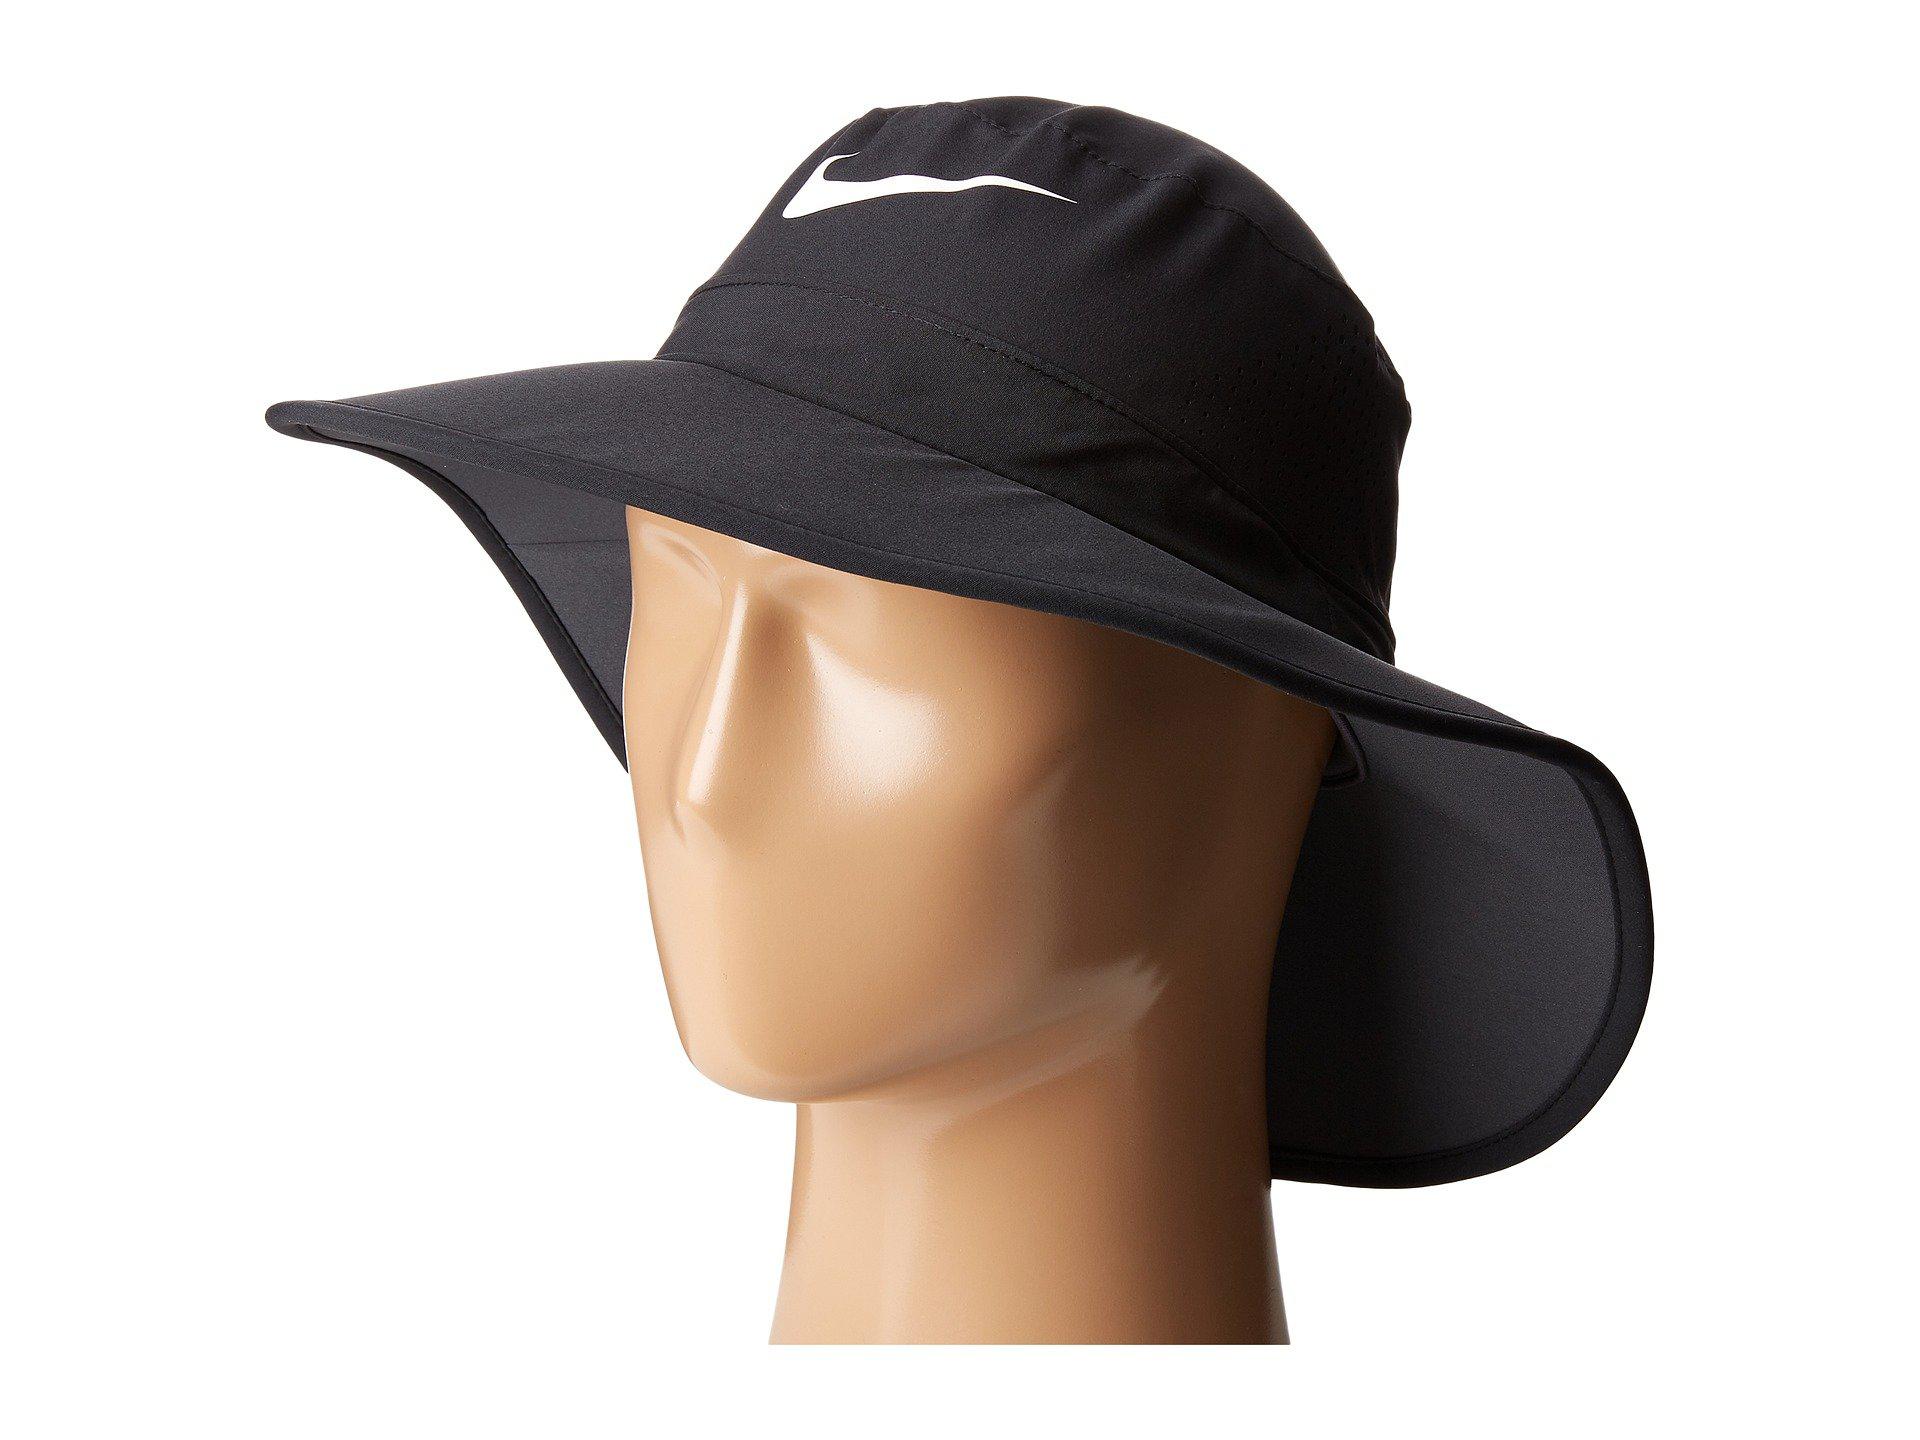 Nike Sun Protect Cap 2.0 (black/wolf Grey/anthracite/white) Caps for